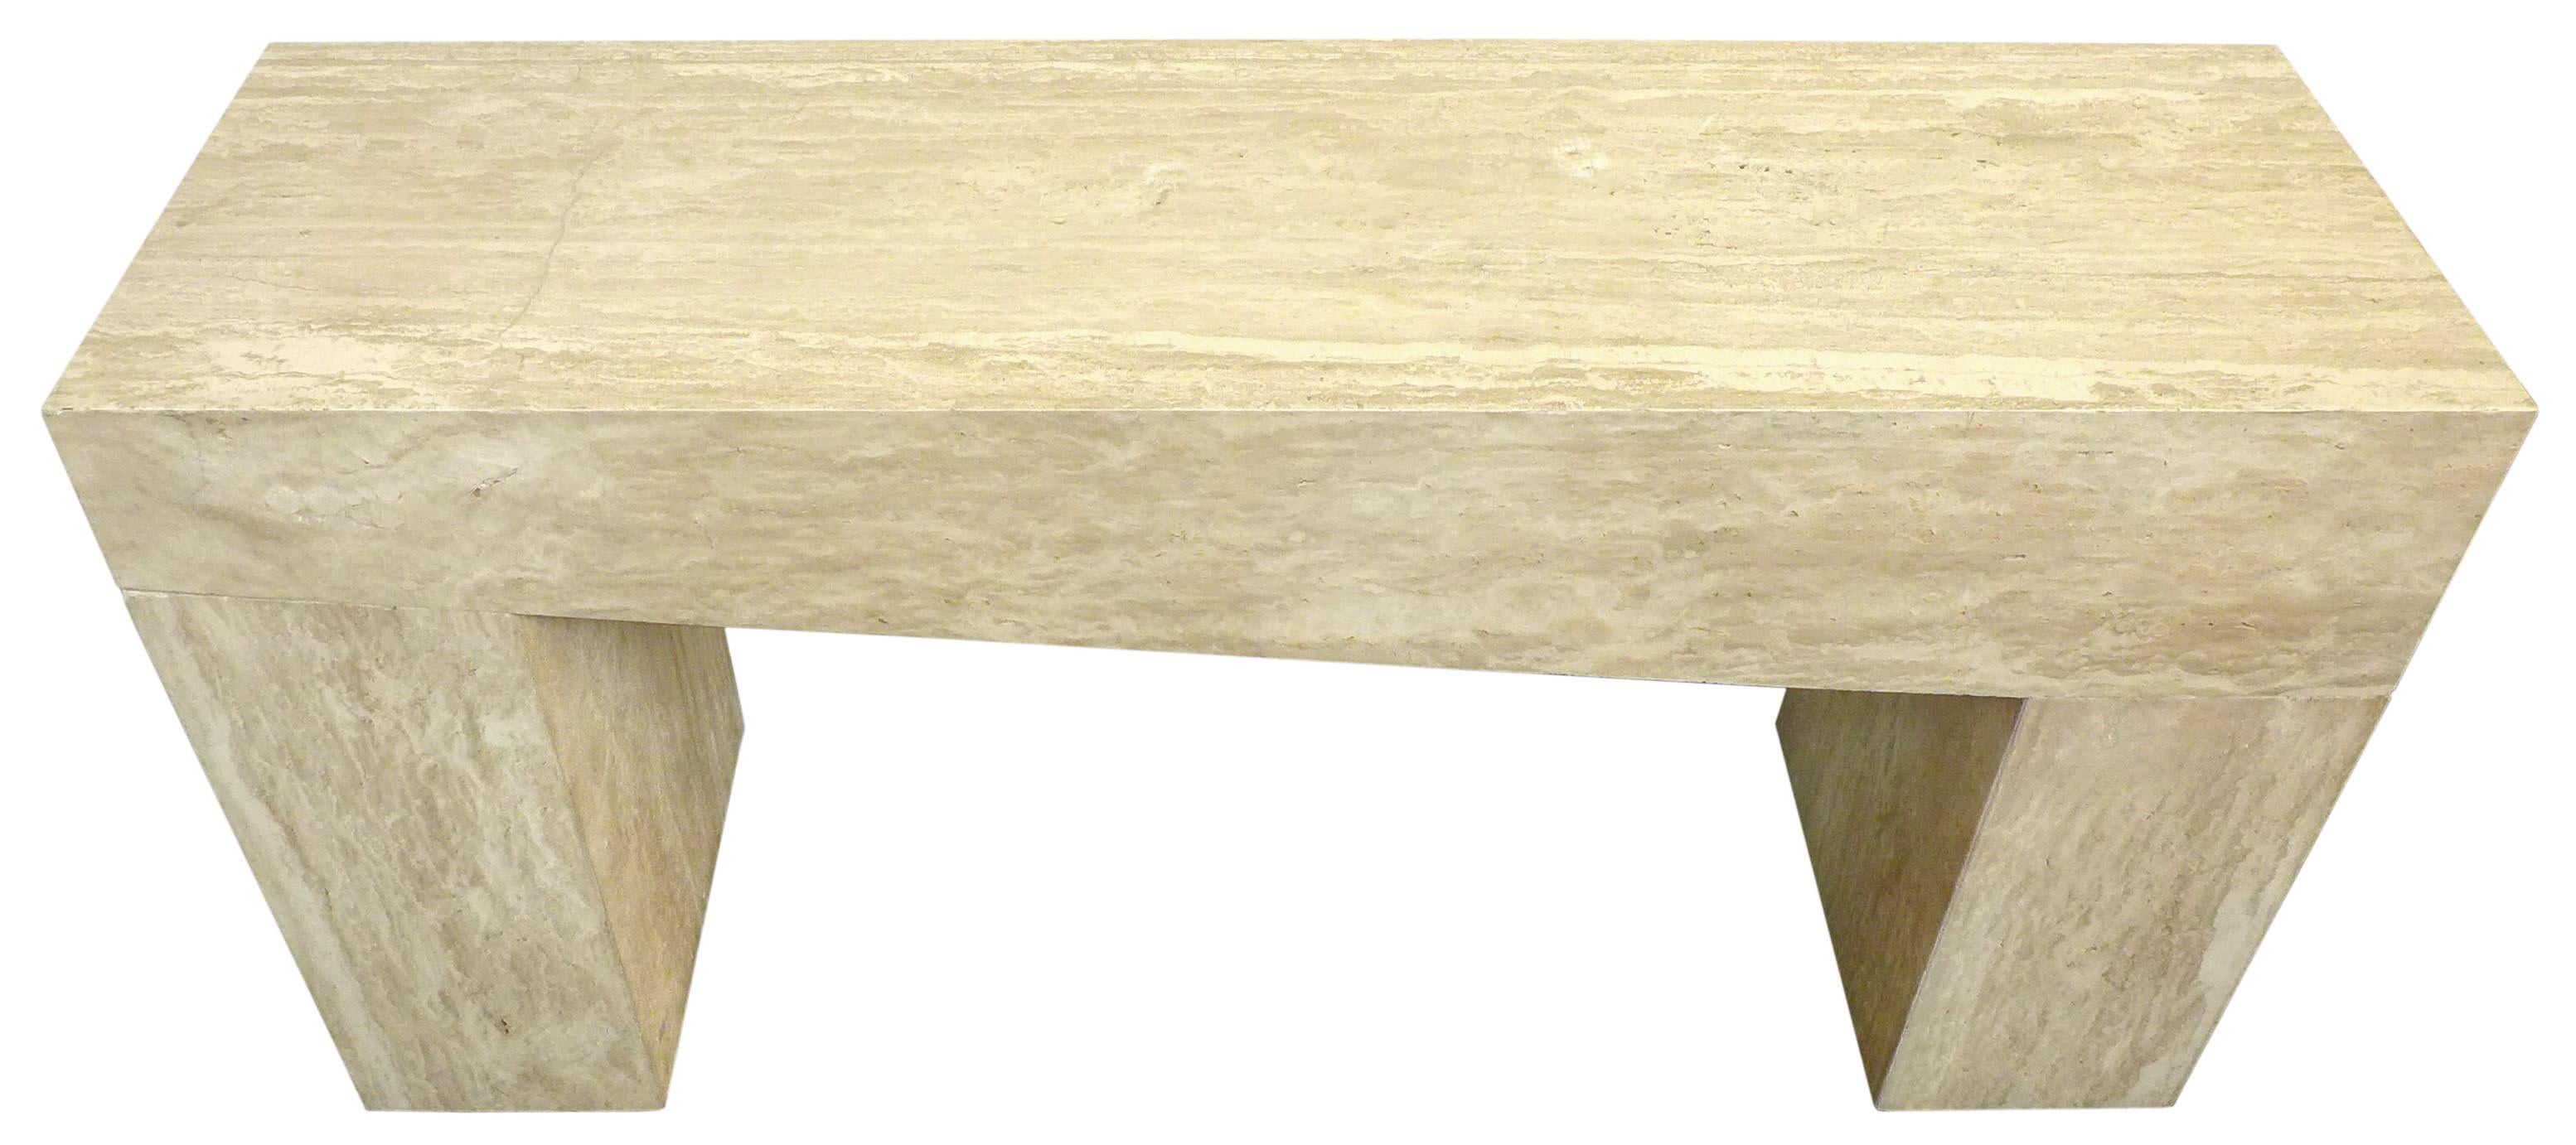 A wonderful, asymmetric travertine console. A massive form constructed of mitered travertine slabs. A tapering-underside top sits atop two pedestal legs giving the impression of one gigantic block of stone; a fantastic silhouette. Classic travertine